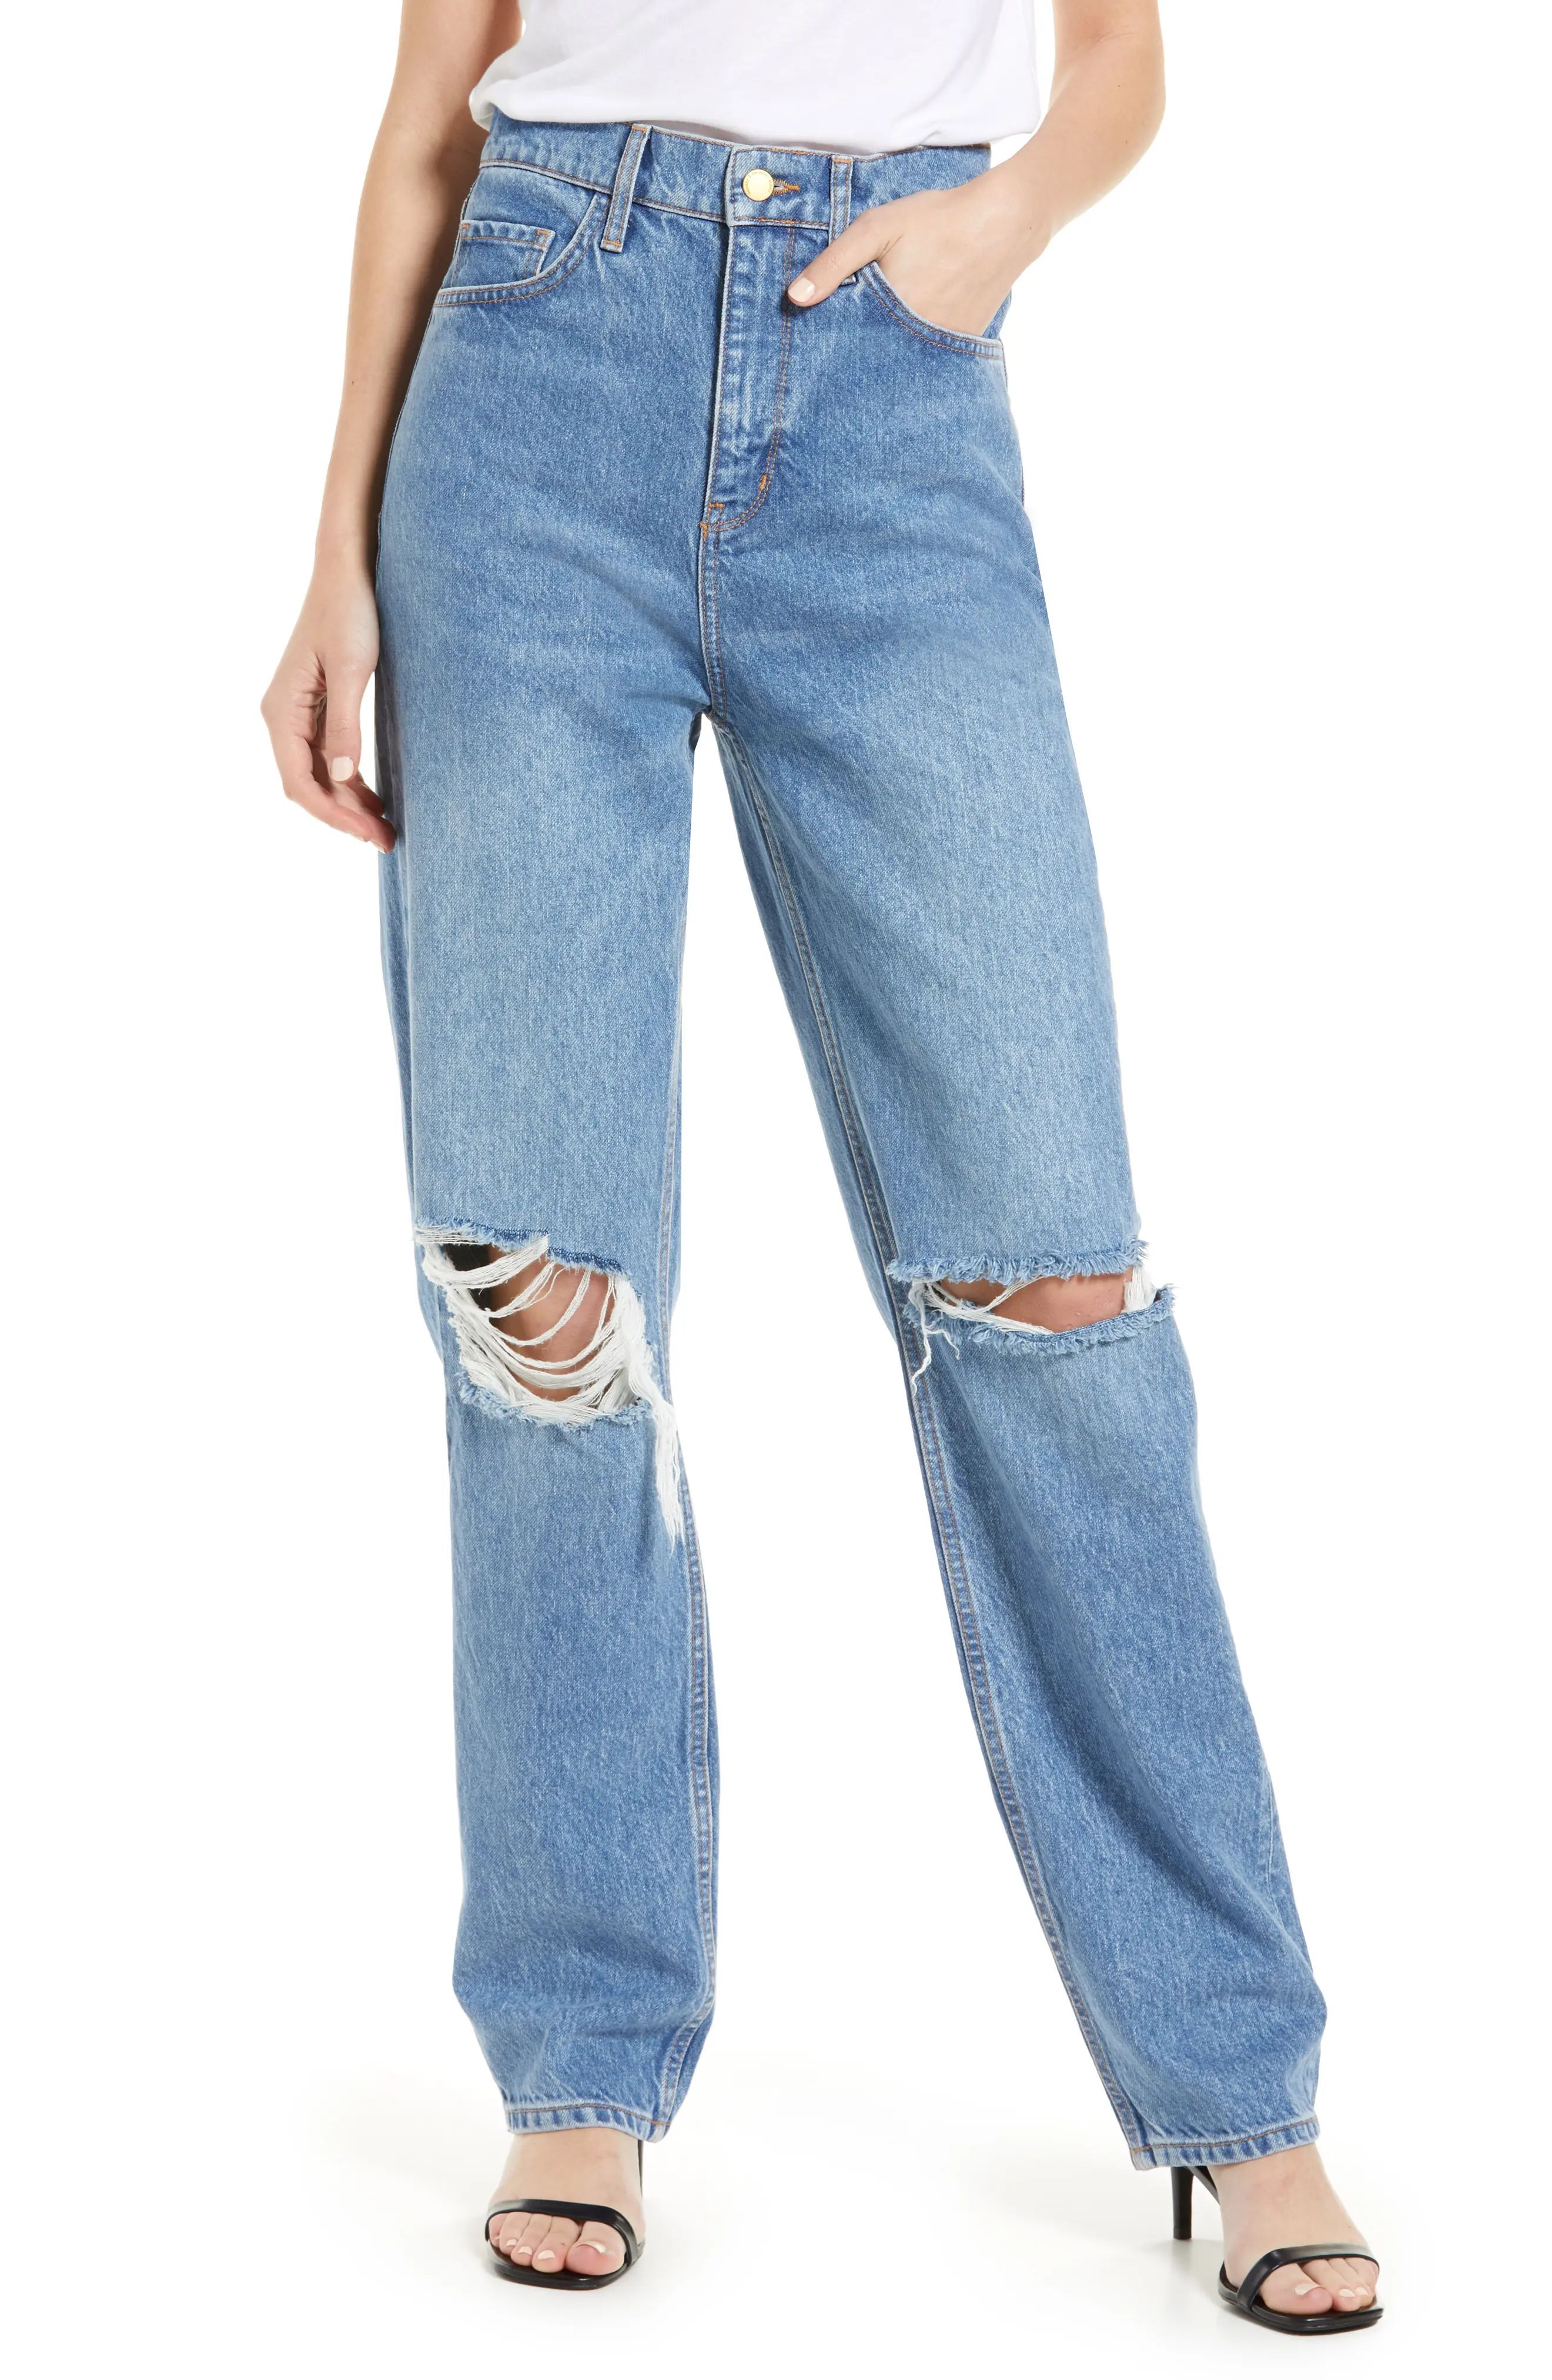 TRIARCHY Josephine Relaxed Ripped Jeans in Indigo at Nordstrom, Size 31 | Nordstrom